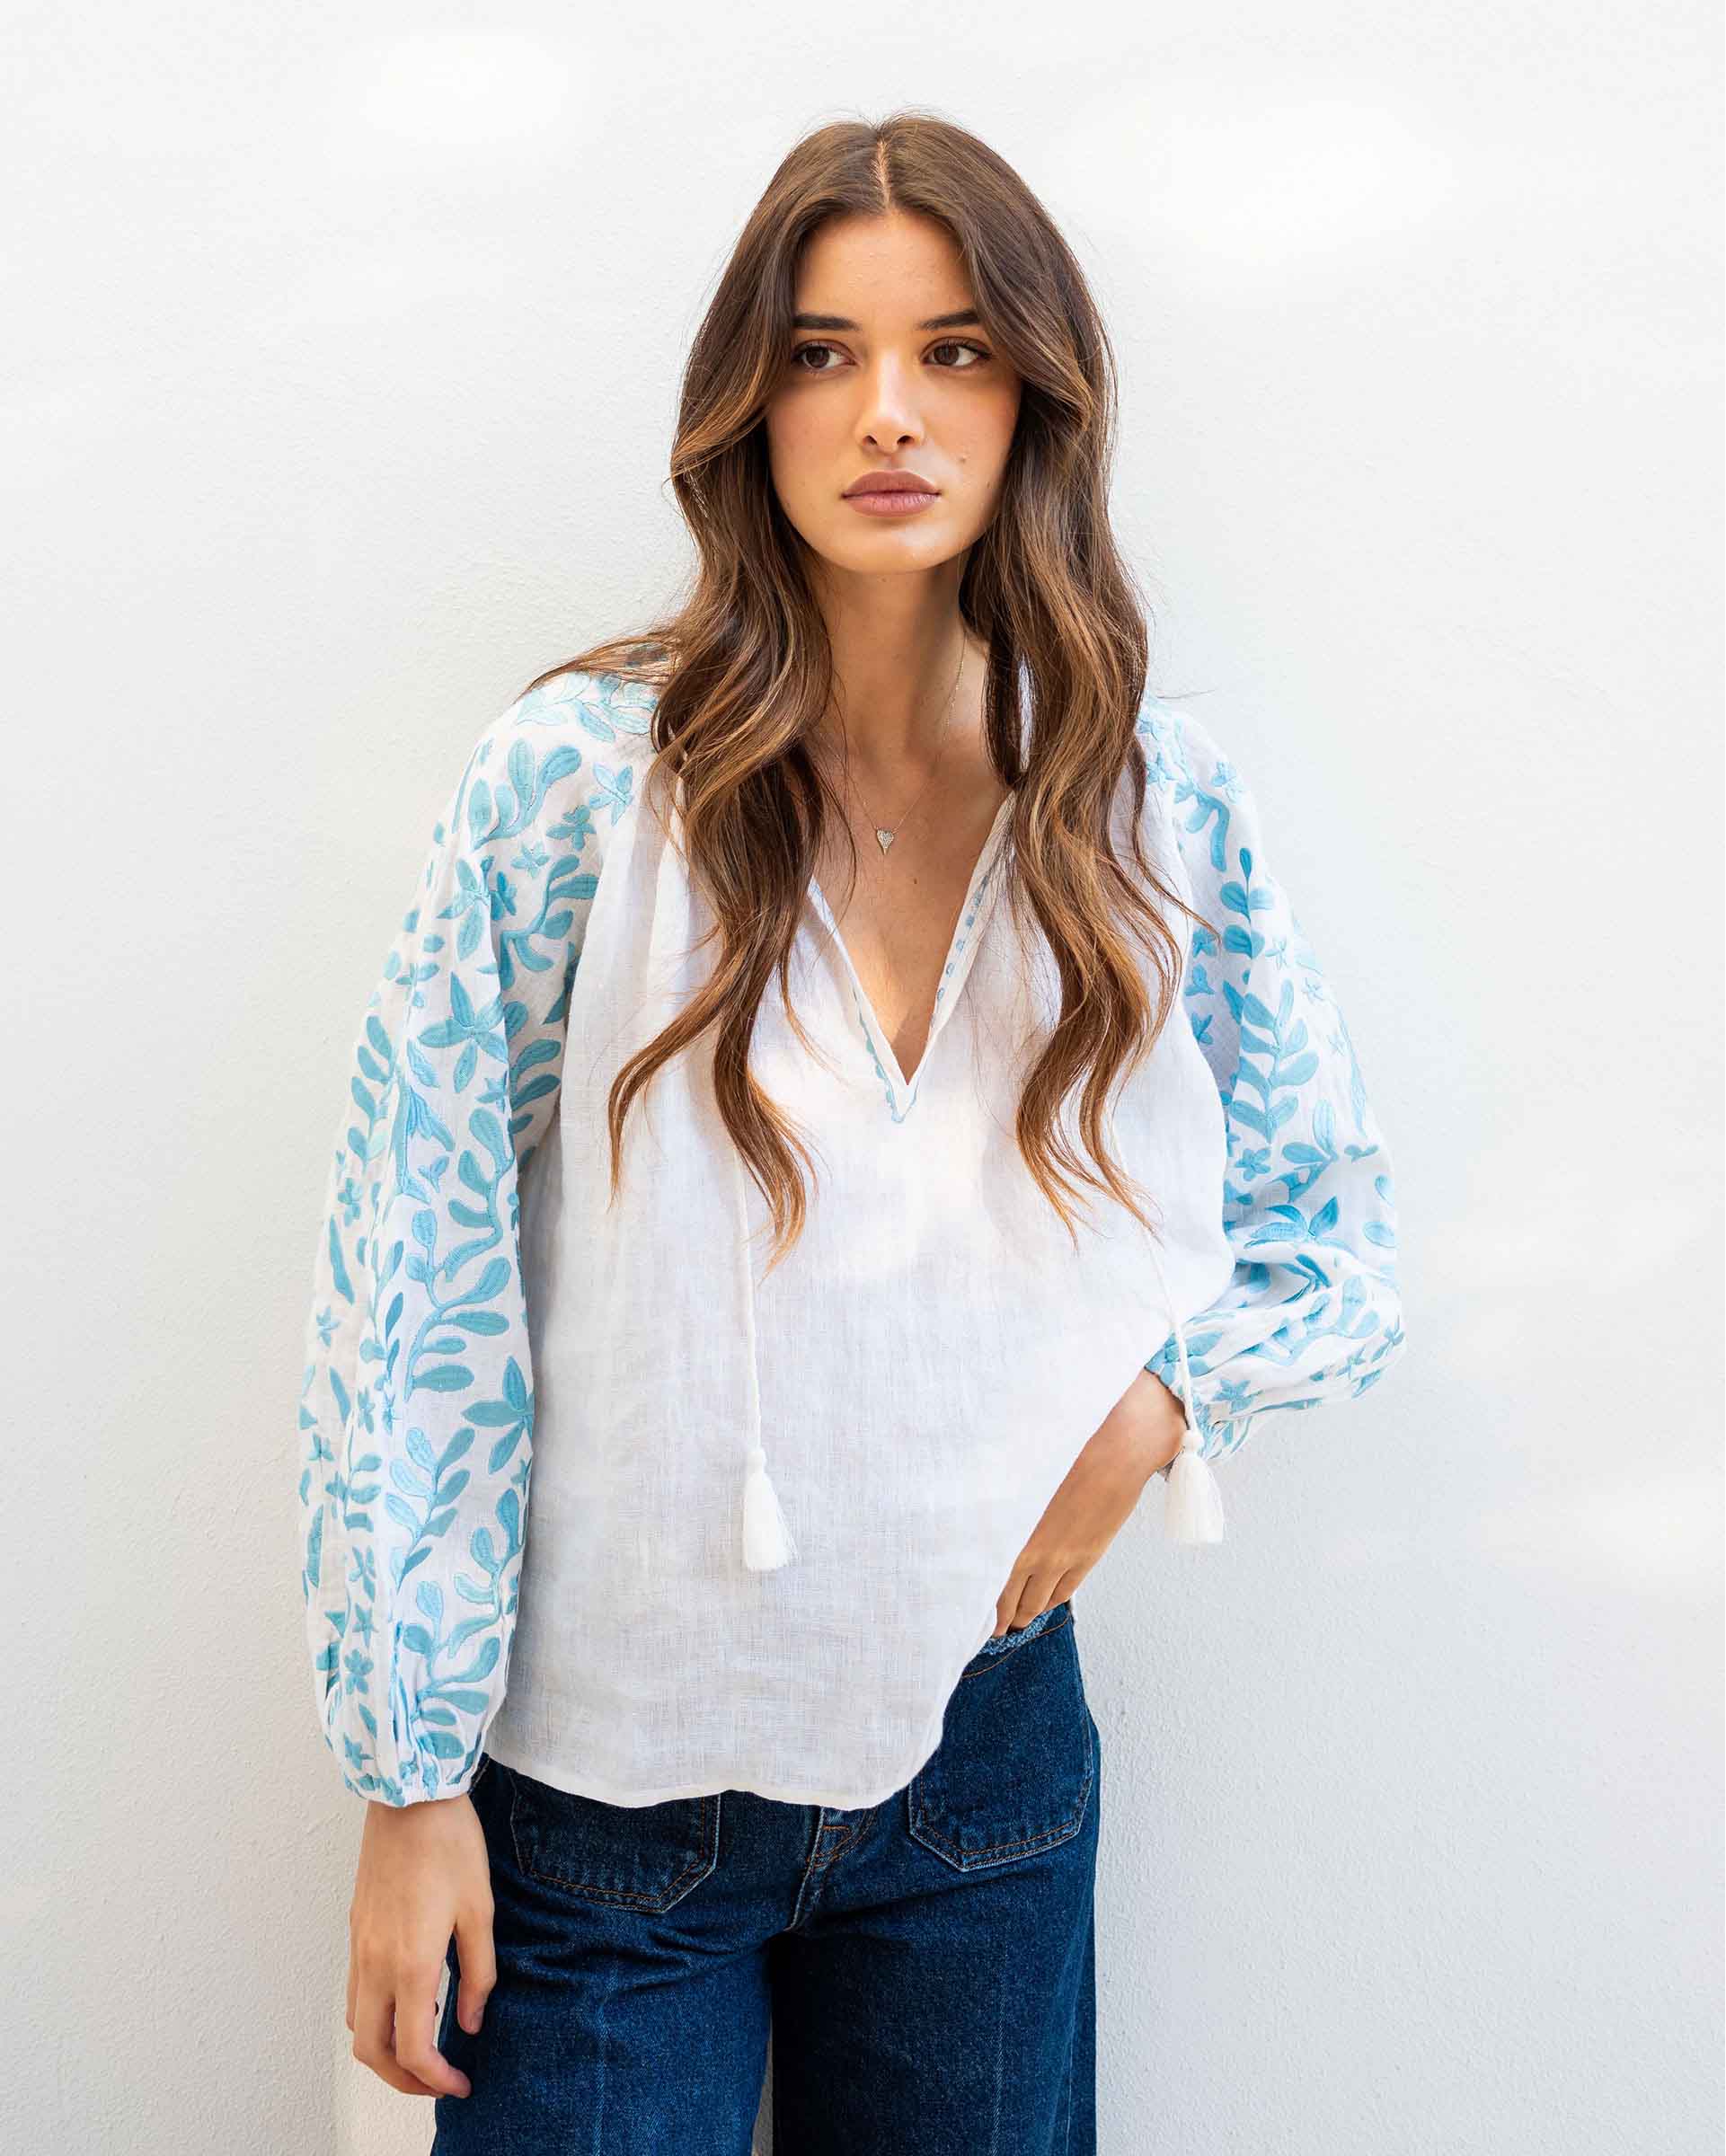 female wearing white and blue embroidered blouse with v-neckline standing in front of a white wall